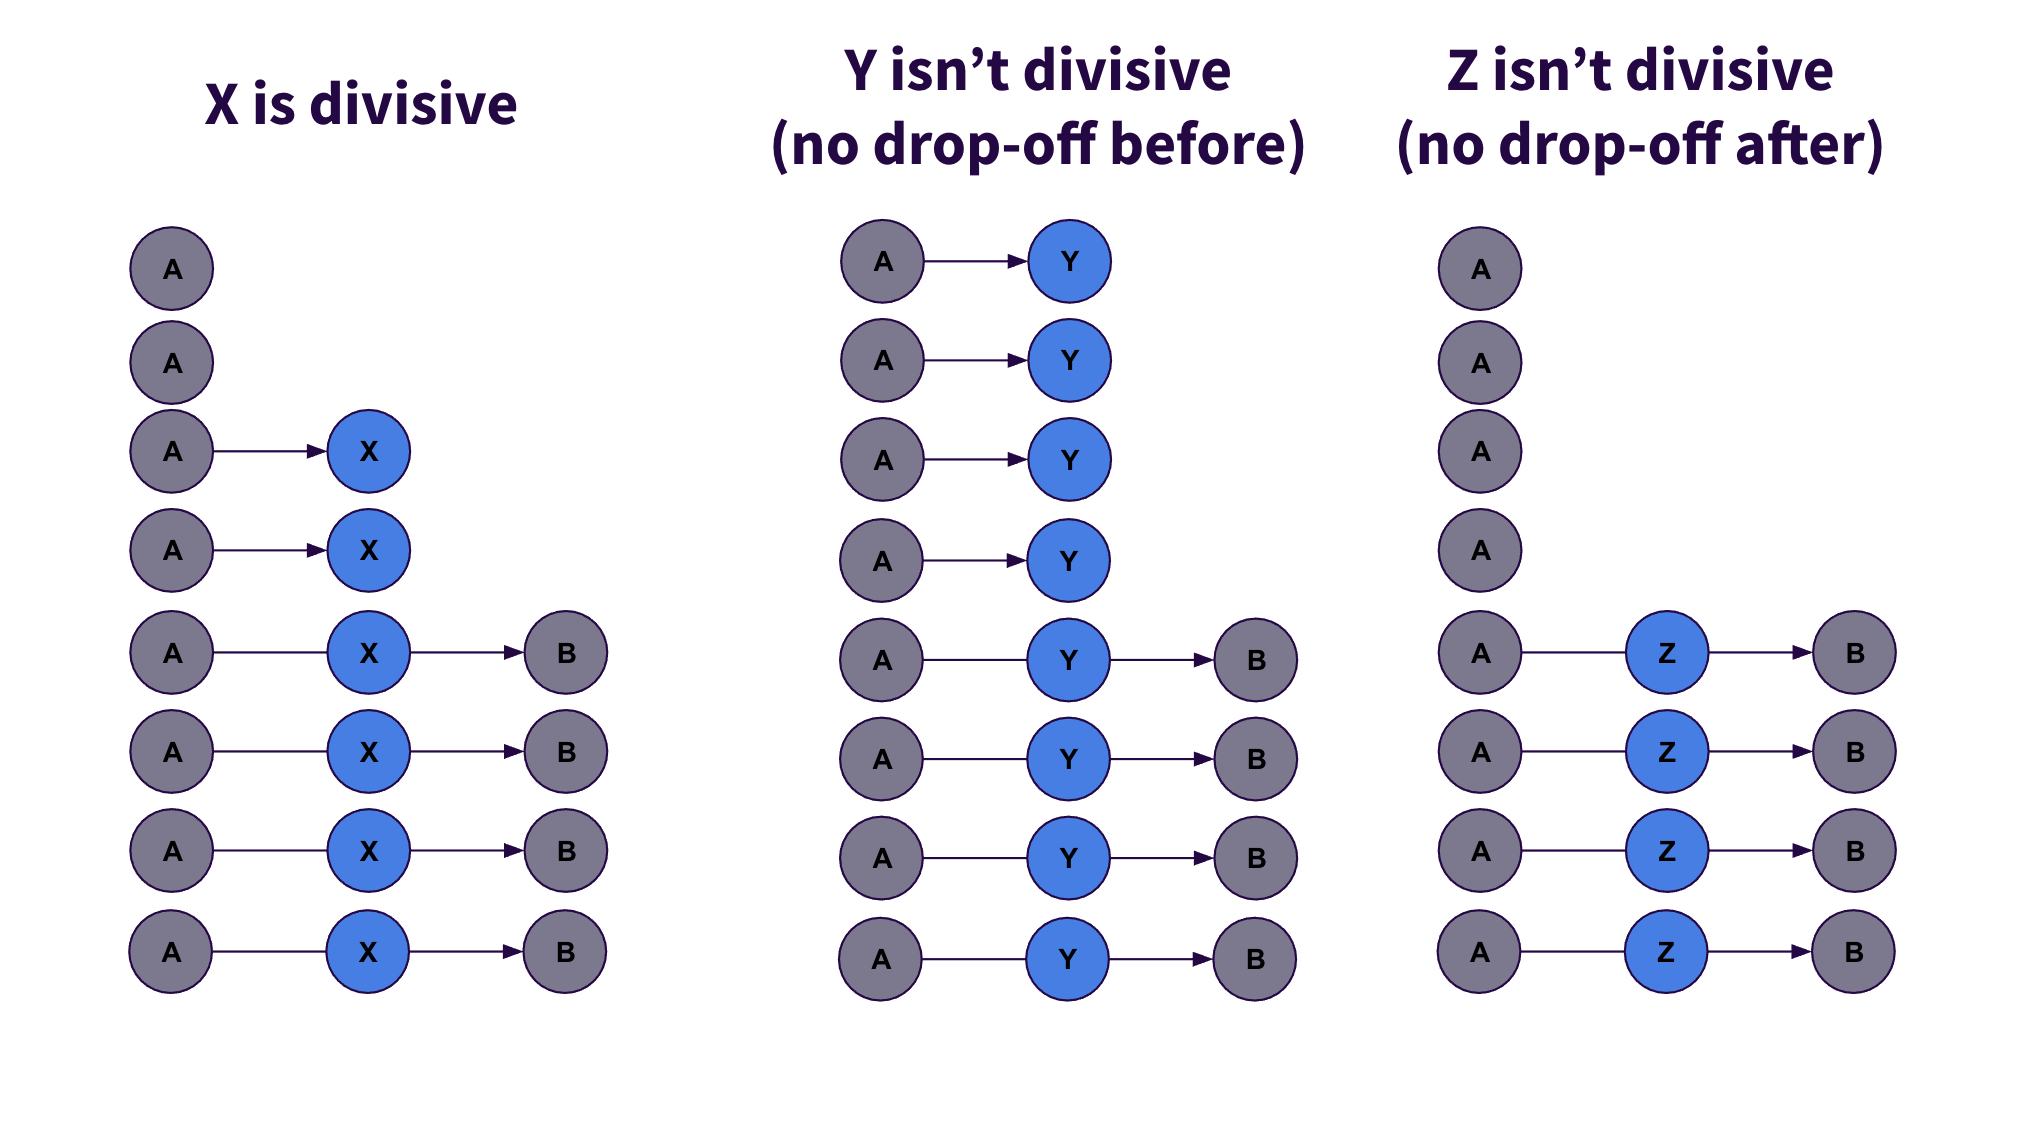 Funnel results when X is divisive, y is not divisive, and z is not divisive